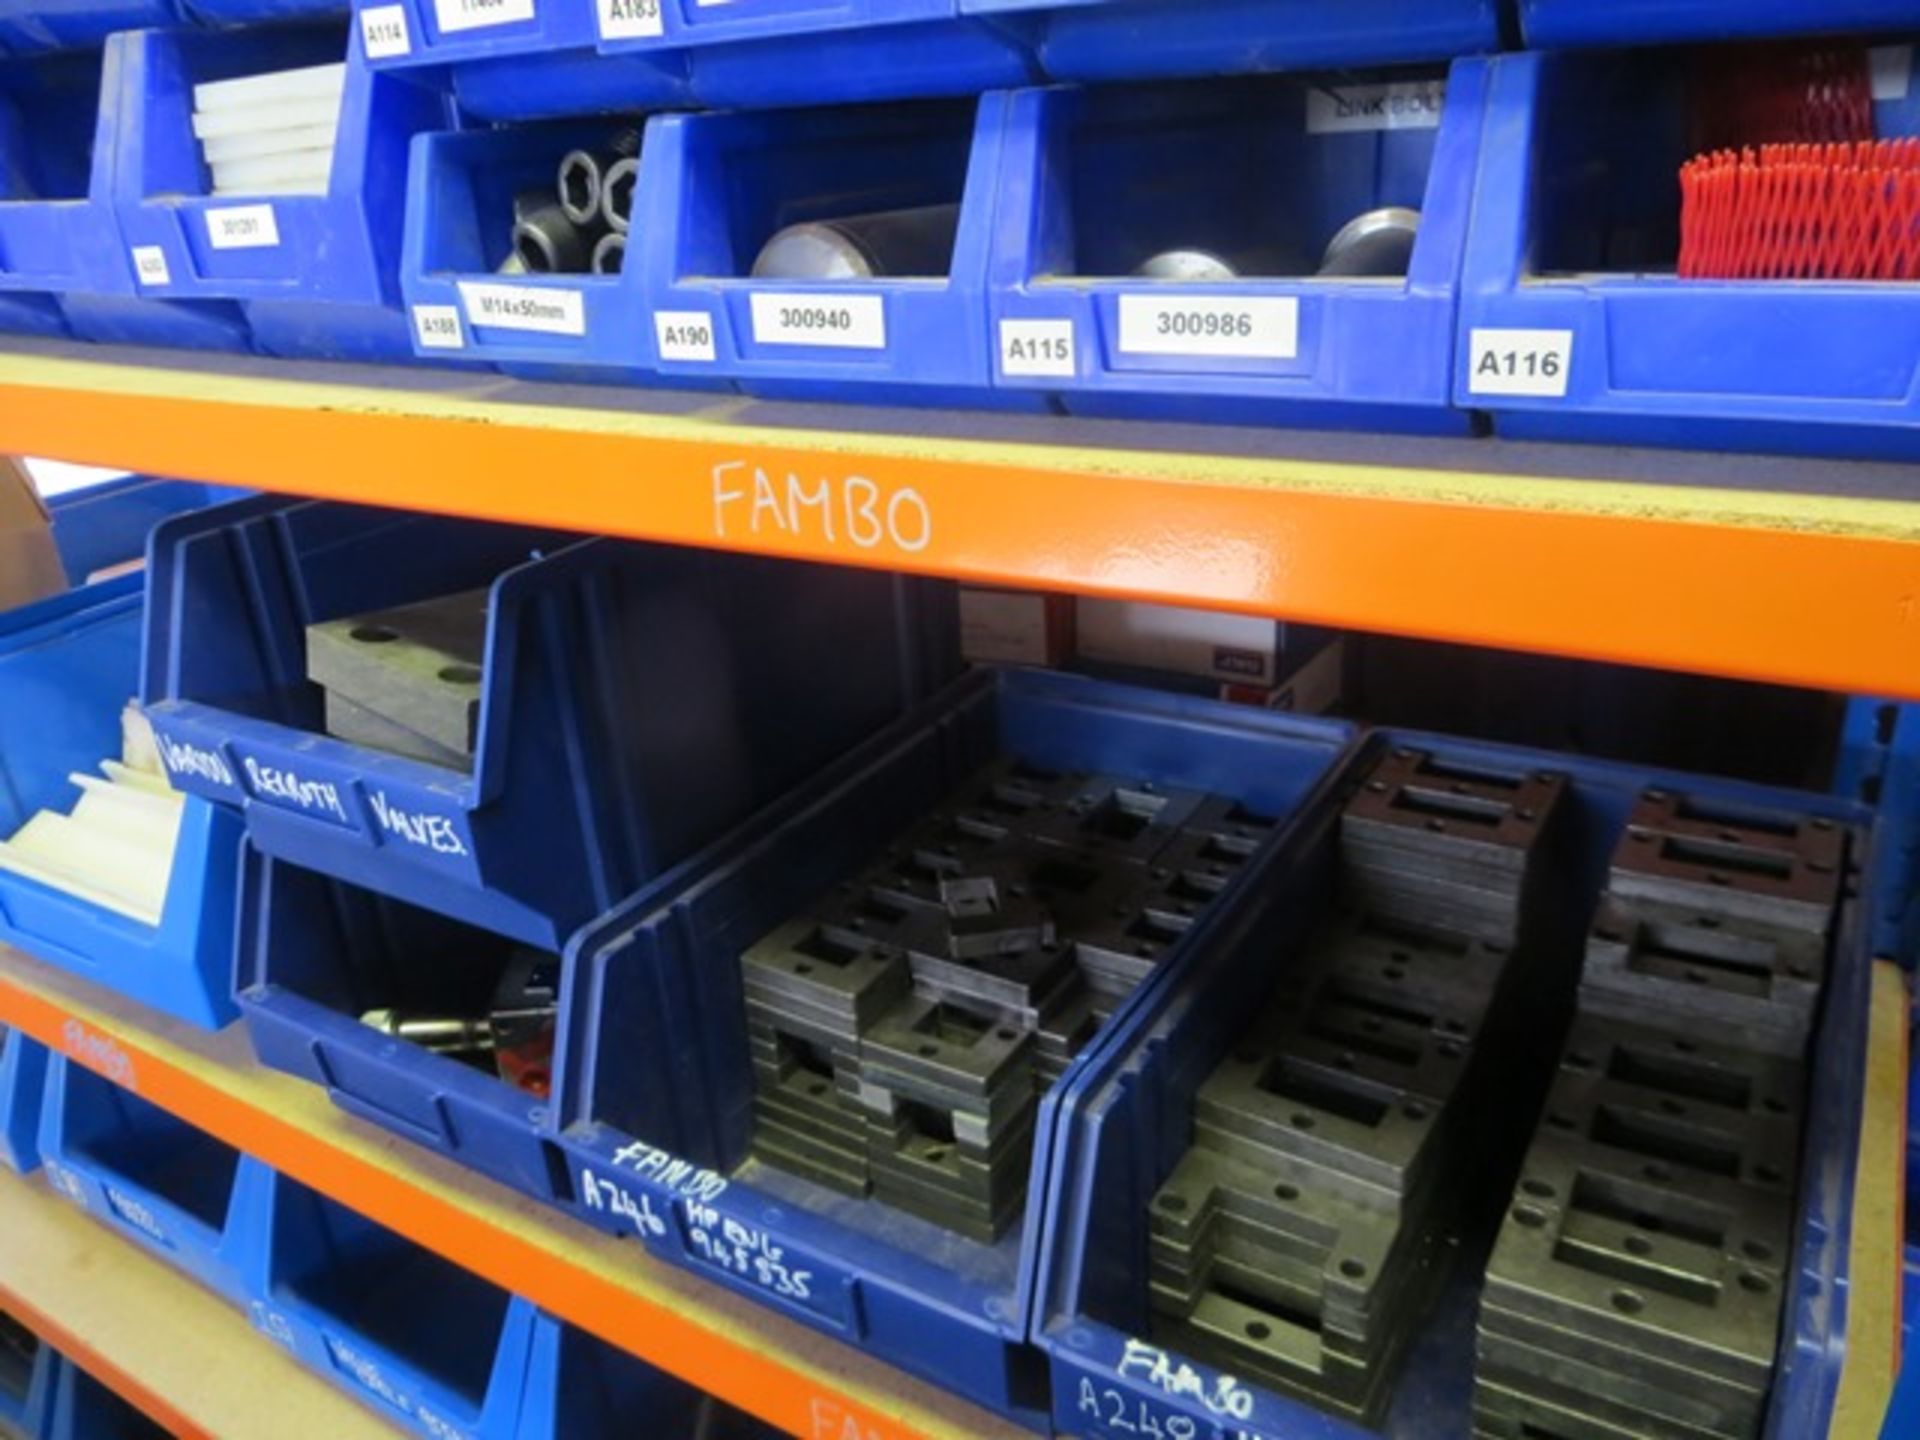 Slot together rack c/w Fambo repair equipment as lotted - Image 2 of 2